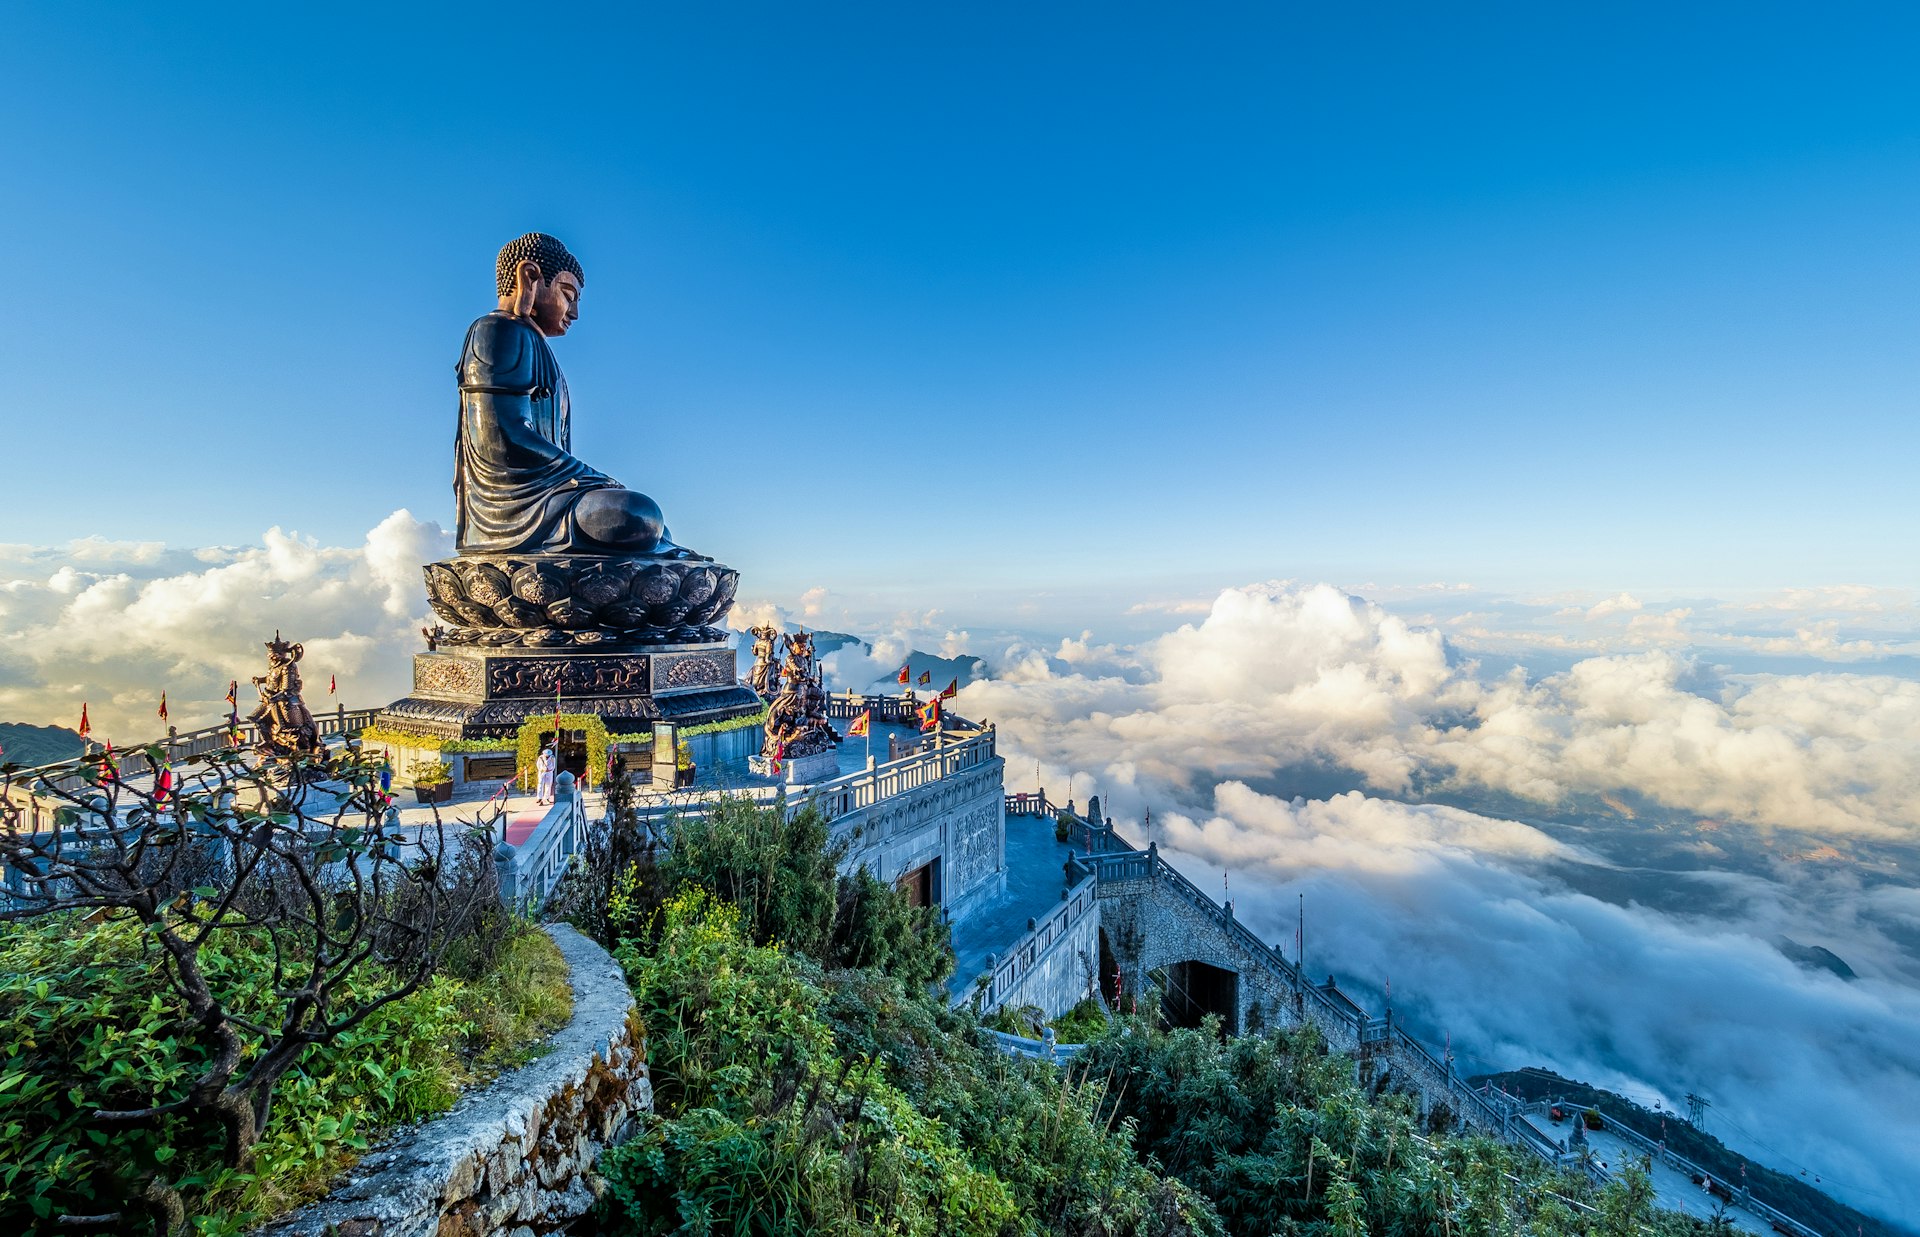 A giant Buddha statue and terrace overlooking clouds and landscapes below from the top of mount Fansipan, Đường District, Lai Chau, Vietnam